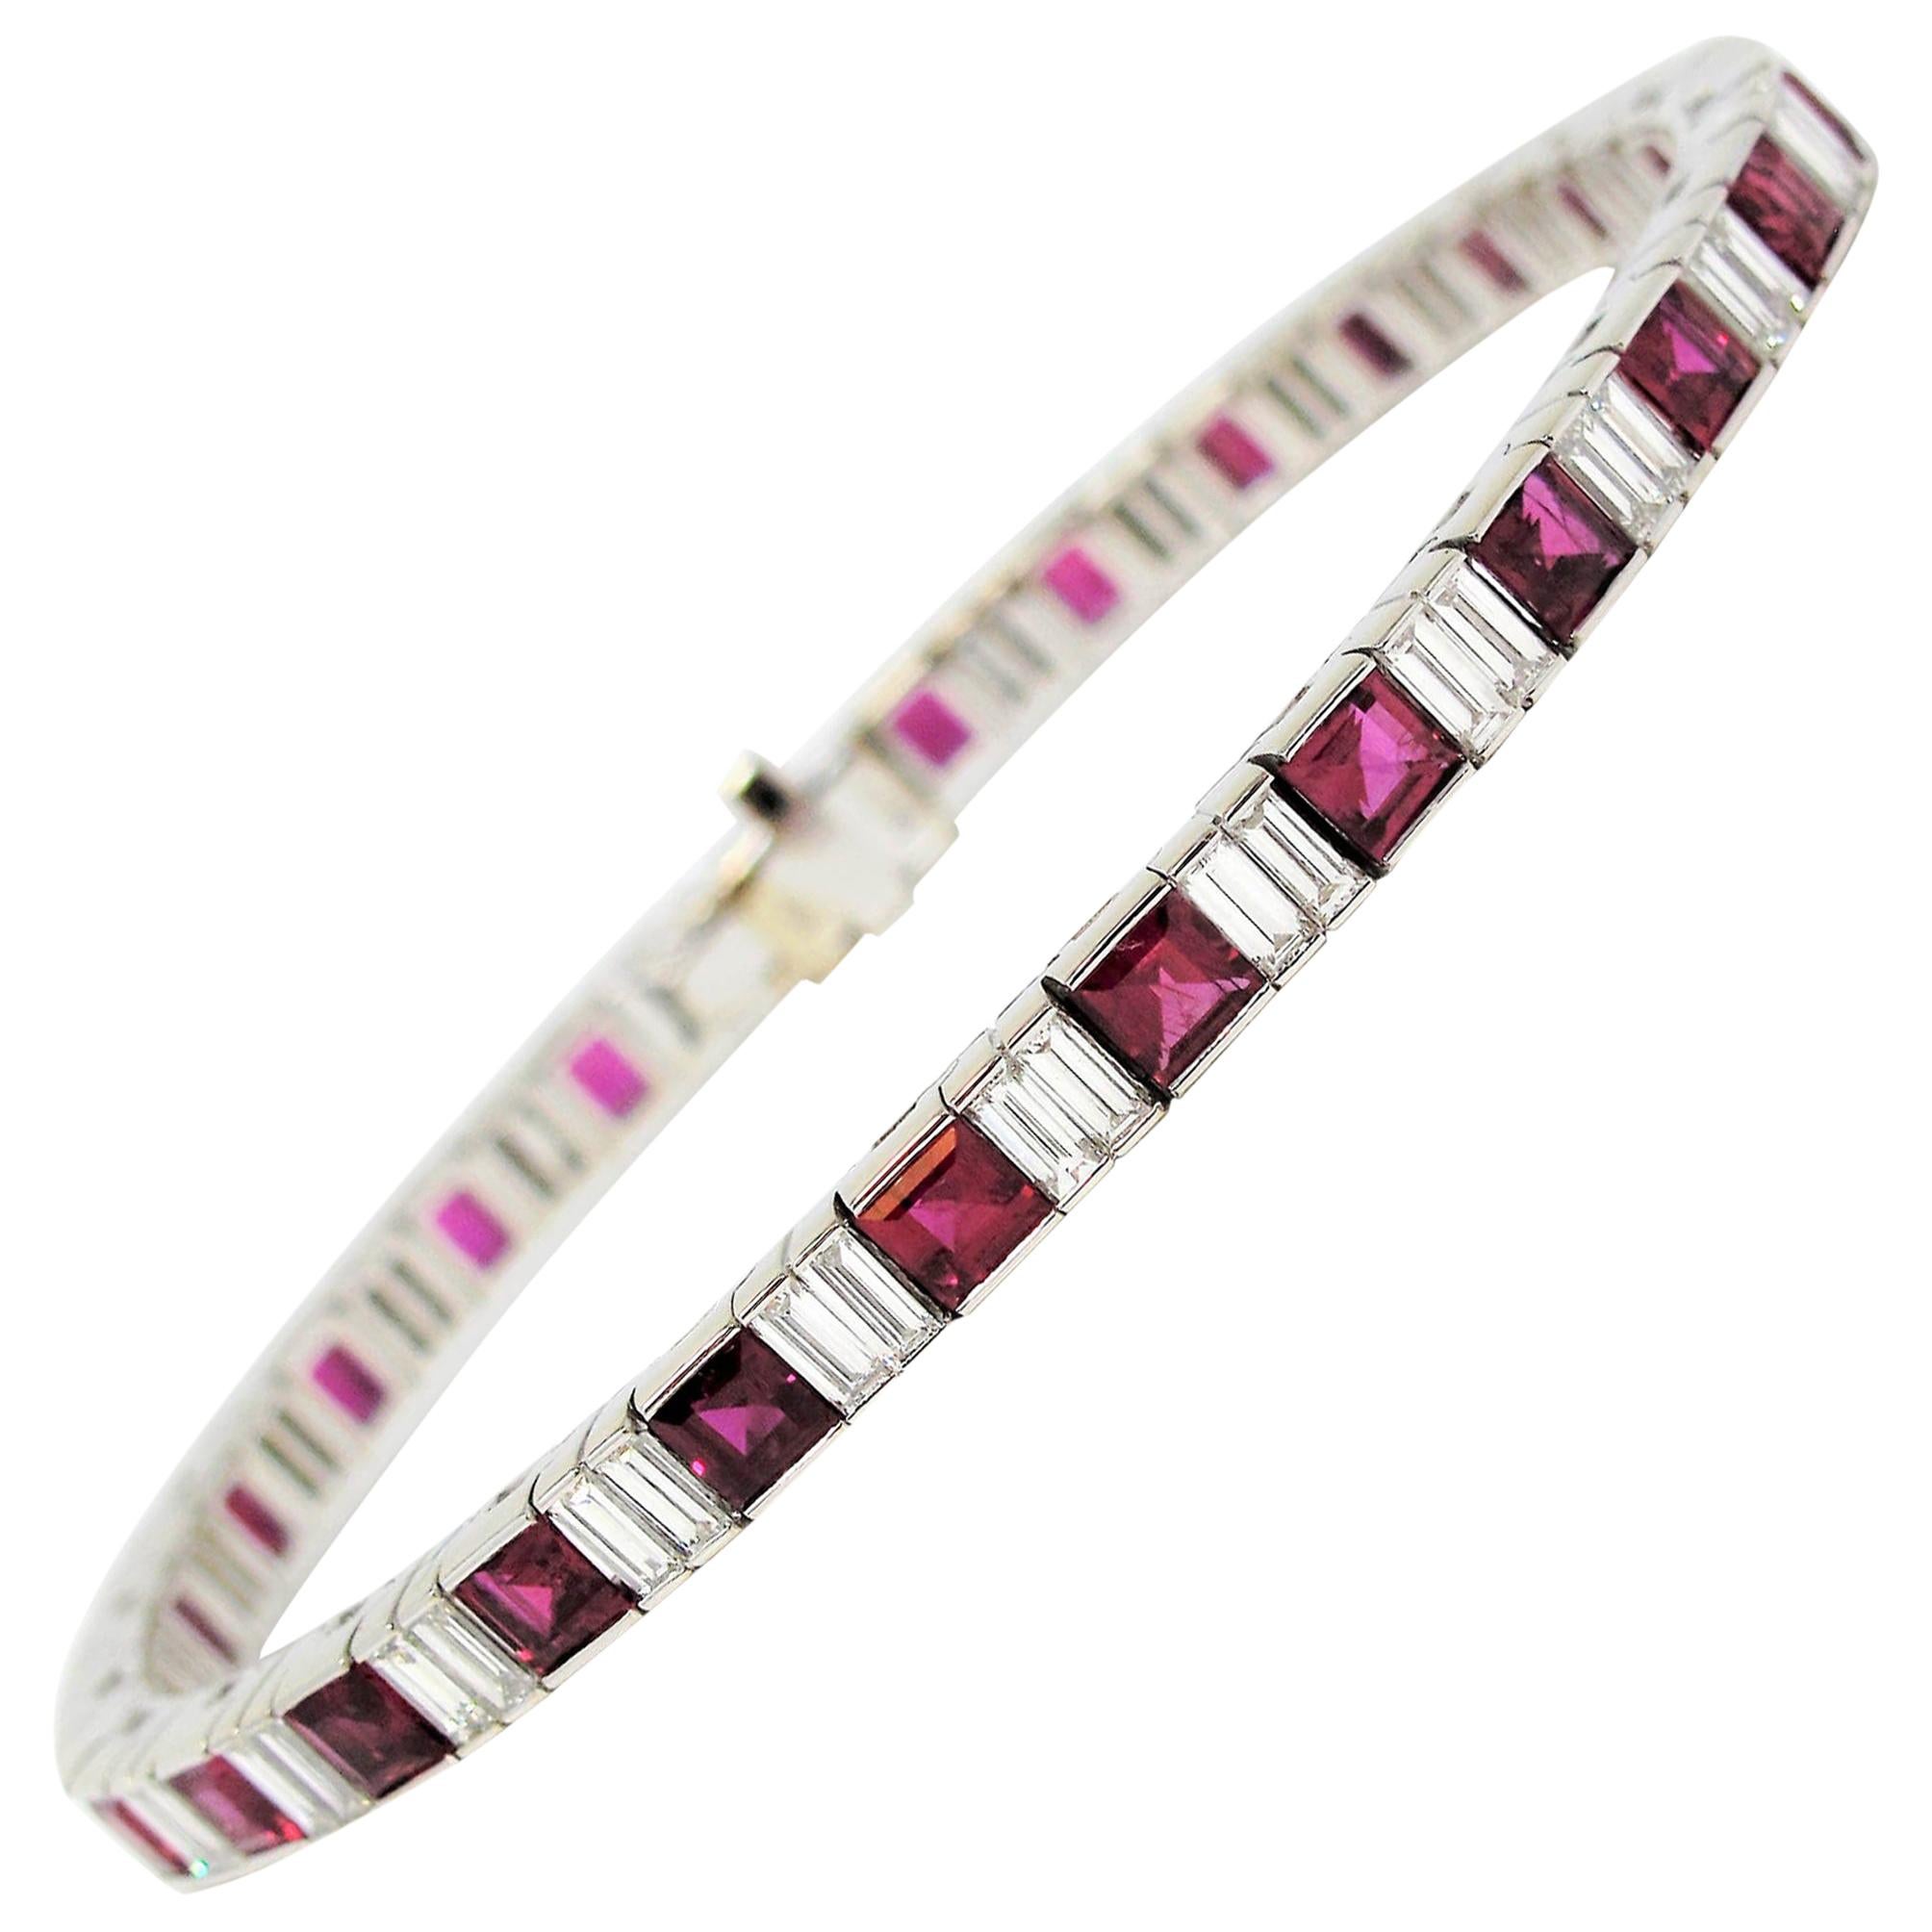 Stunning, elegant tennis bracelet with a bright pop of color. This gorgeous piece absolutely dazzles with its rich red rubies and bright white diamonds. The sleek, linear design paired with the contemporary squared shape of the gemstones, takes this